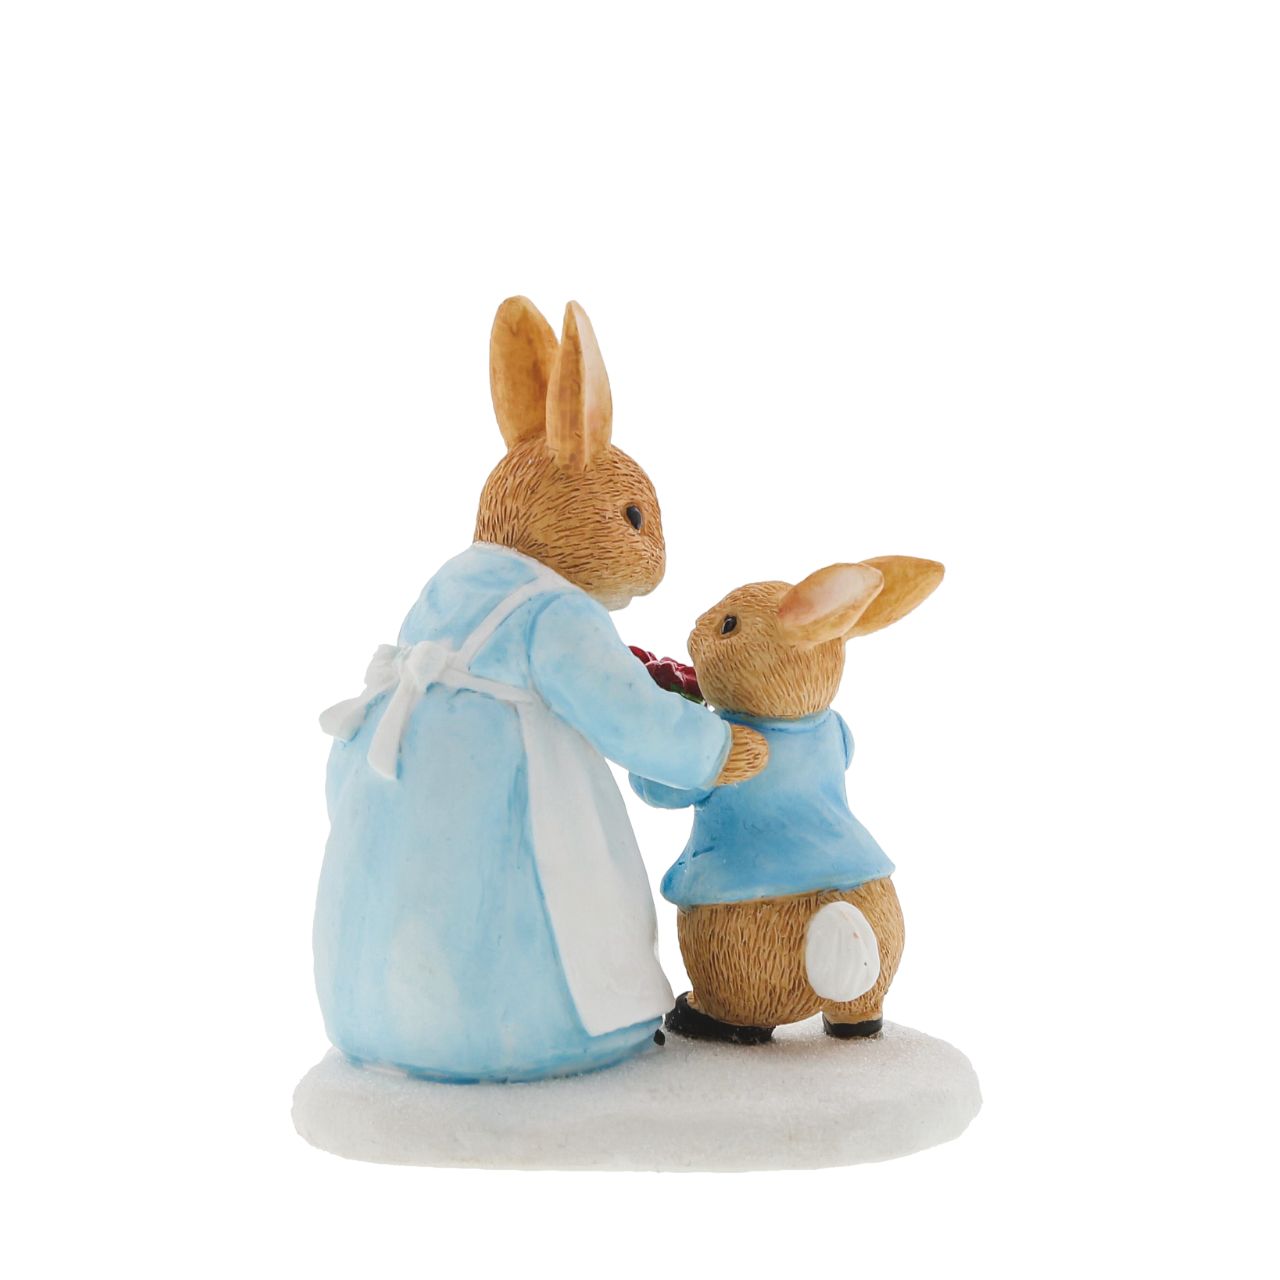 Beatrix Potter Mrs. Rabbit Passing Peter Rabbit a Present Figurine  Wish someone a very Merry Christmas with this beautiful, Mrs. Rabbit Passing Peter Rabbit a Present Figurine. This charming figurine would make a treasured keepsake over the festive period, and would be take pride of place in your home this Christmas.